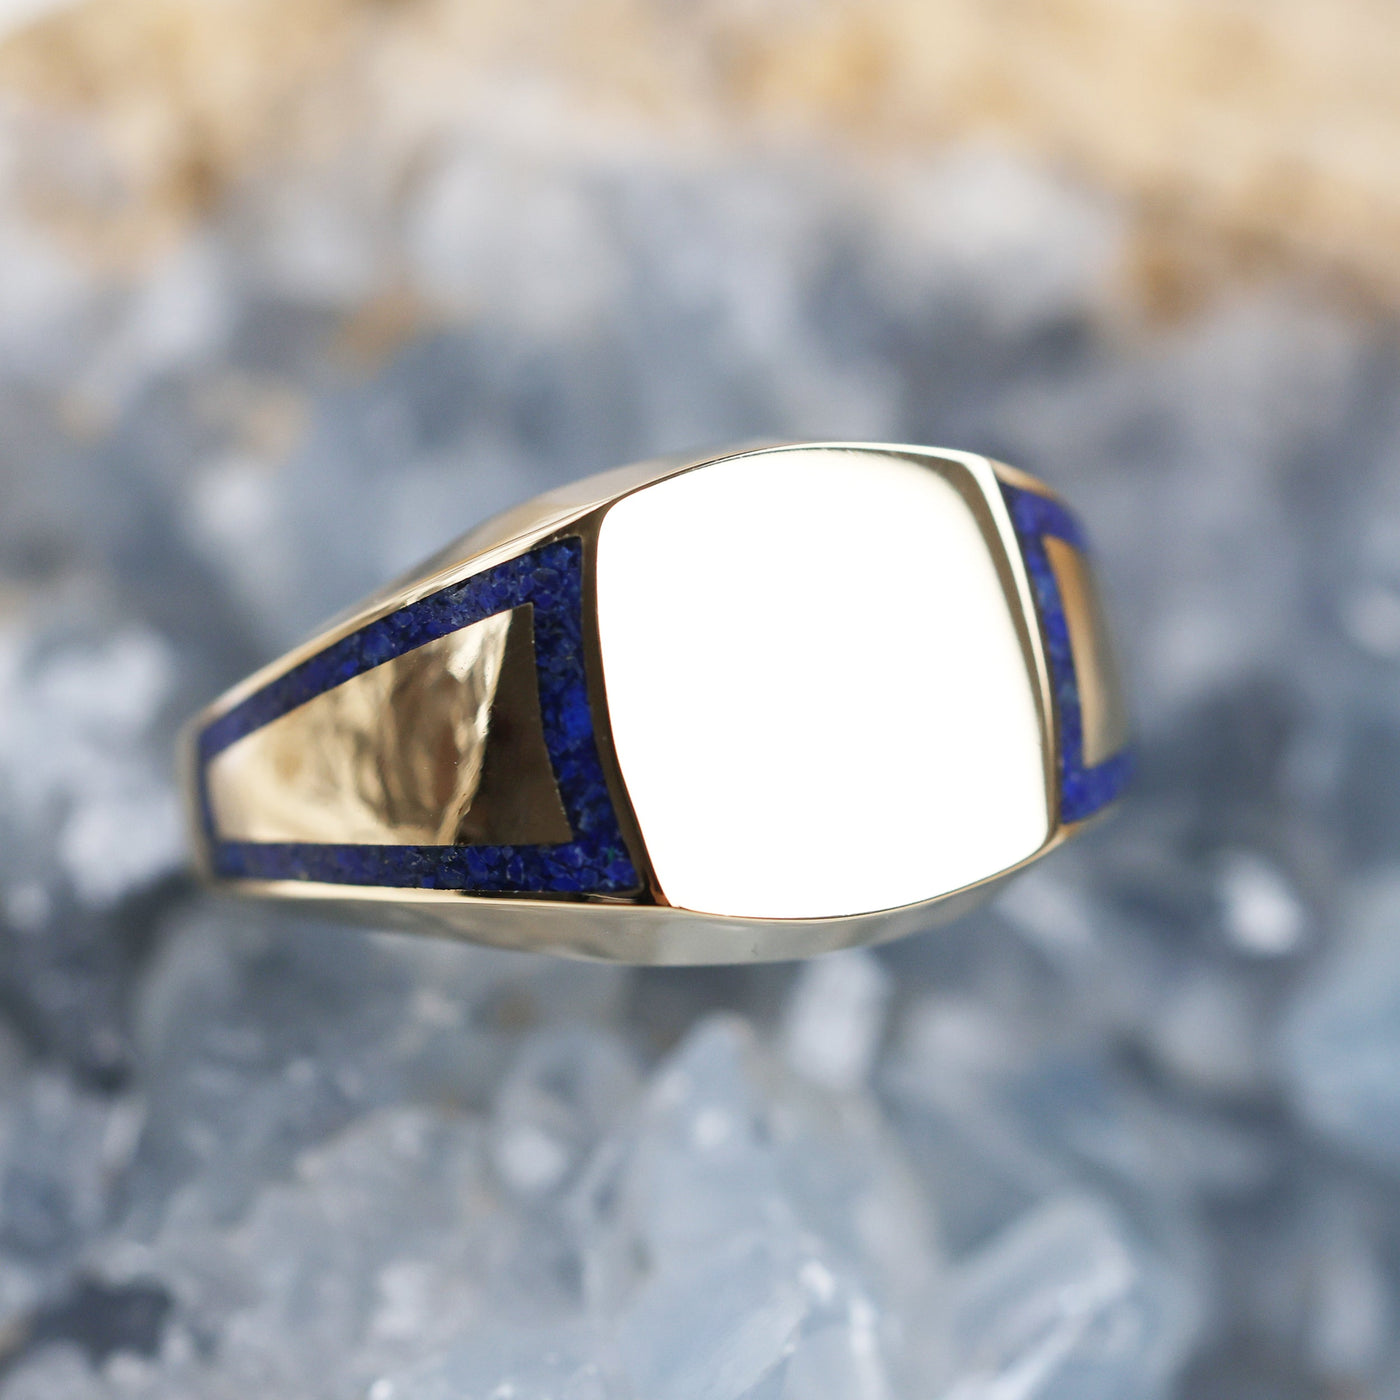 A close-up of a unique Crushed Lapis Signet Ring with inlay band.